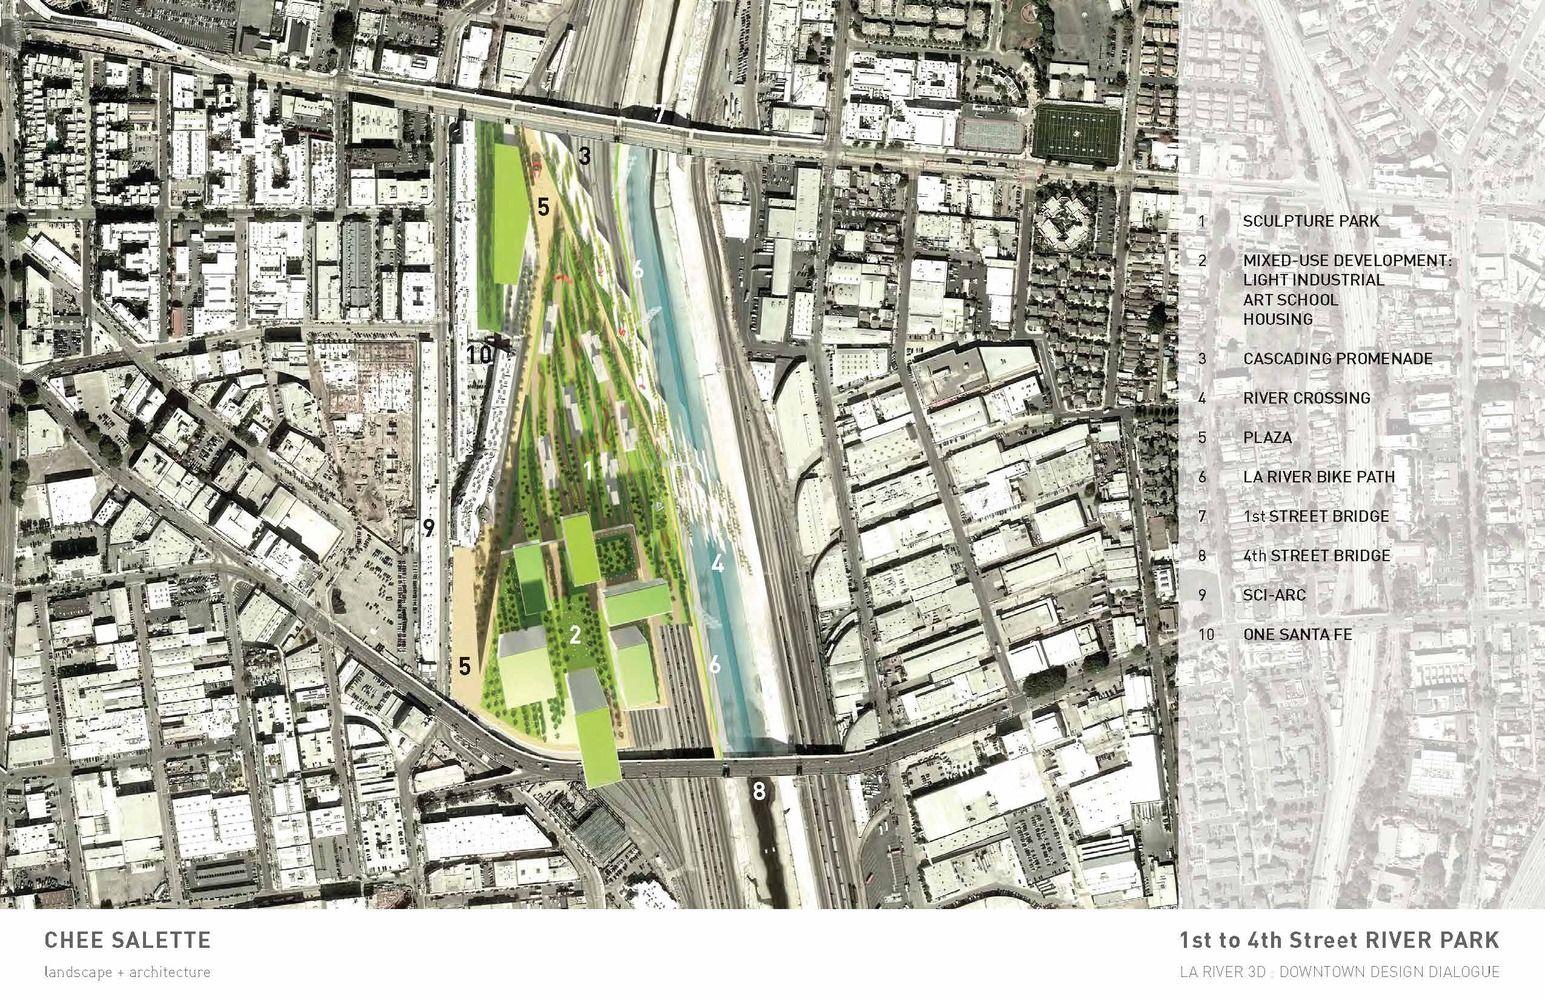 Los Angeles Bureau of Engineering Logo - Gallery of 7 Firms Reveal Plans for Los Angeles River Revitalization